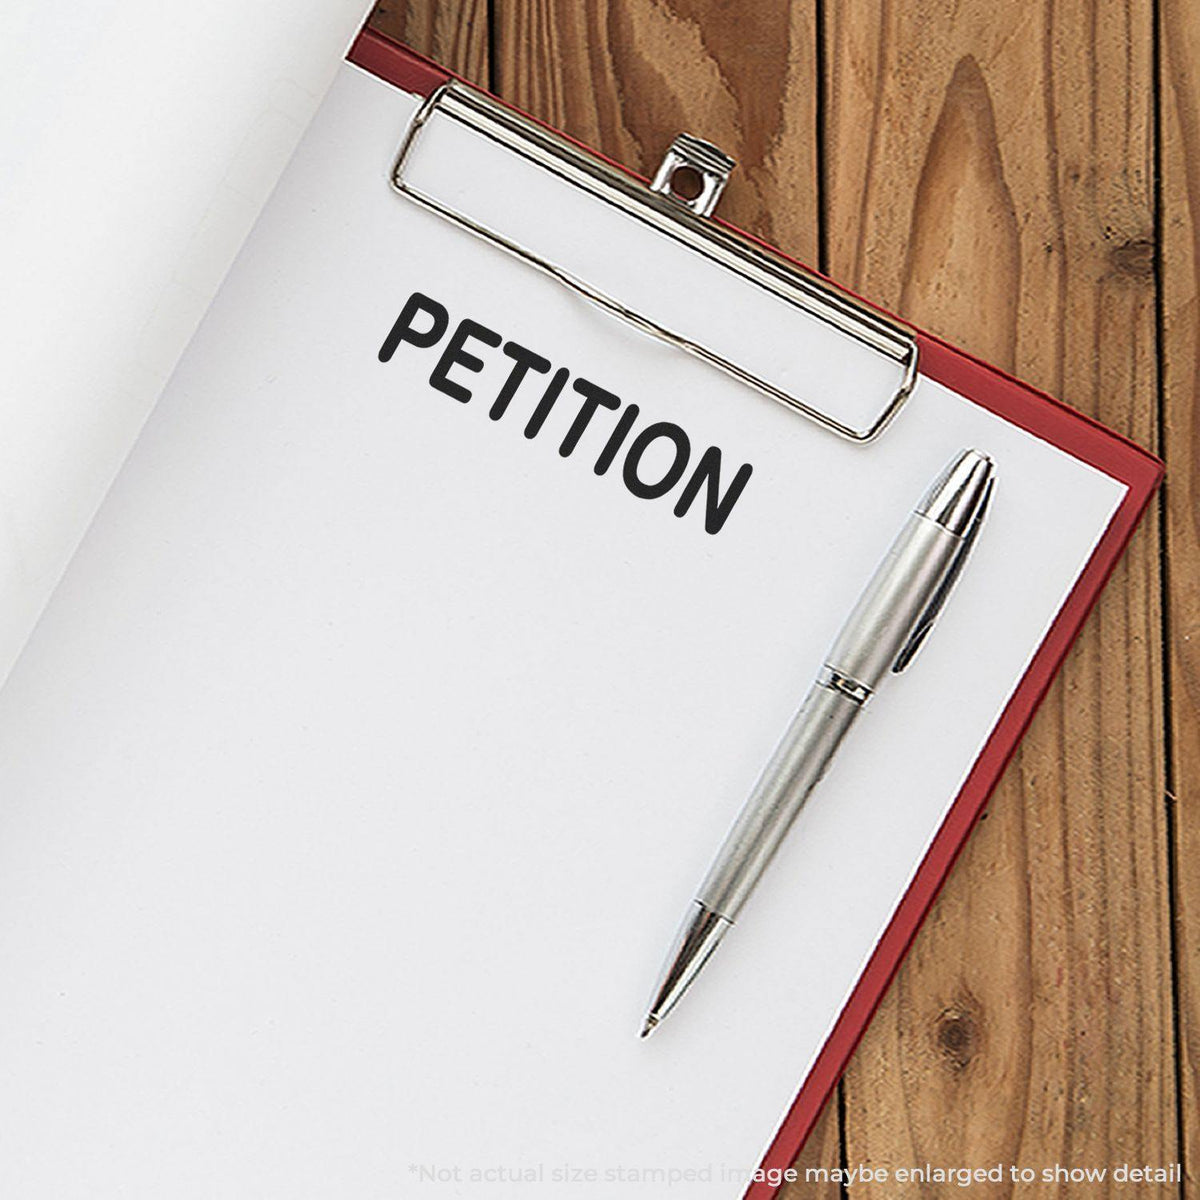 Large Petition Rubber Stamp In Use Photo